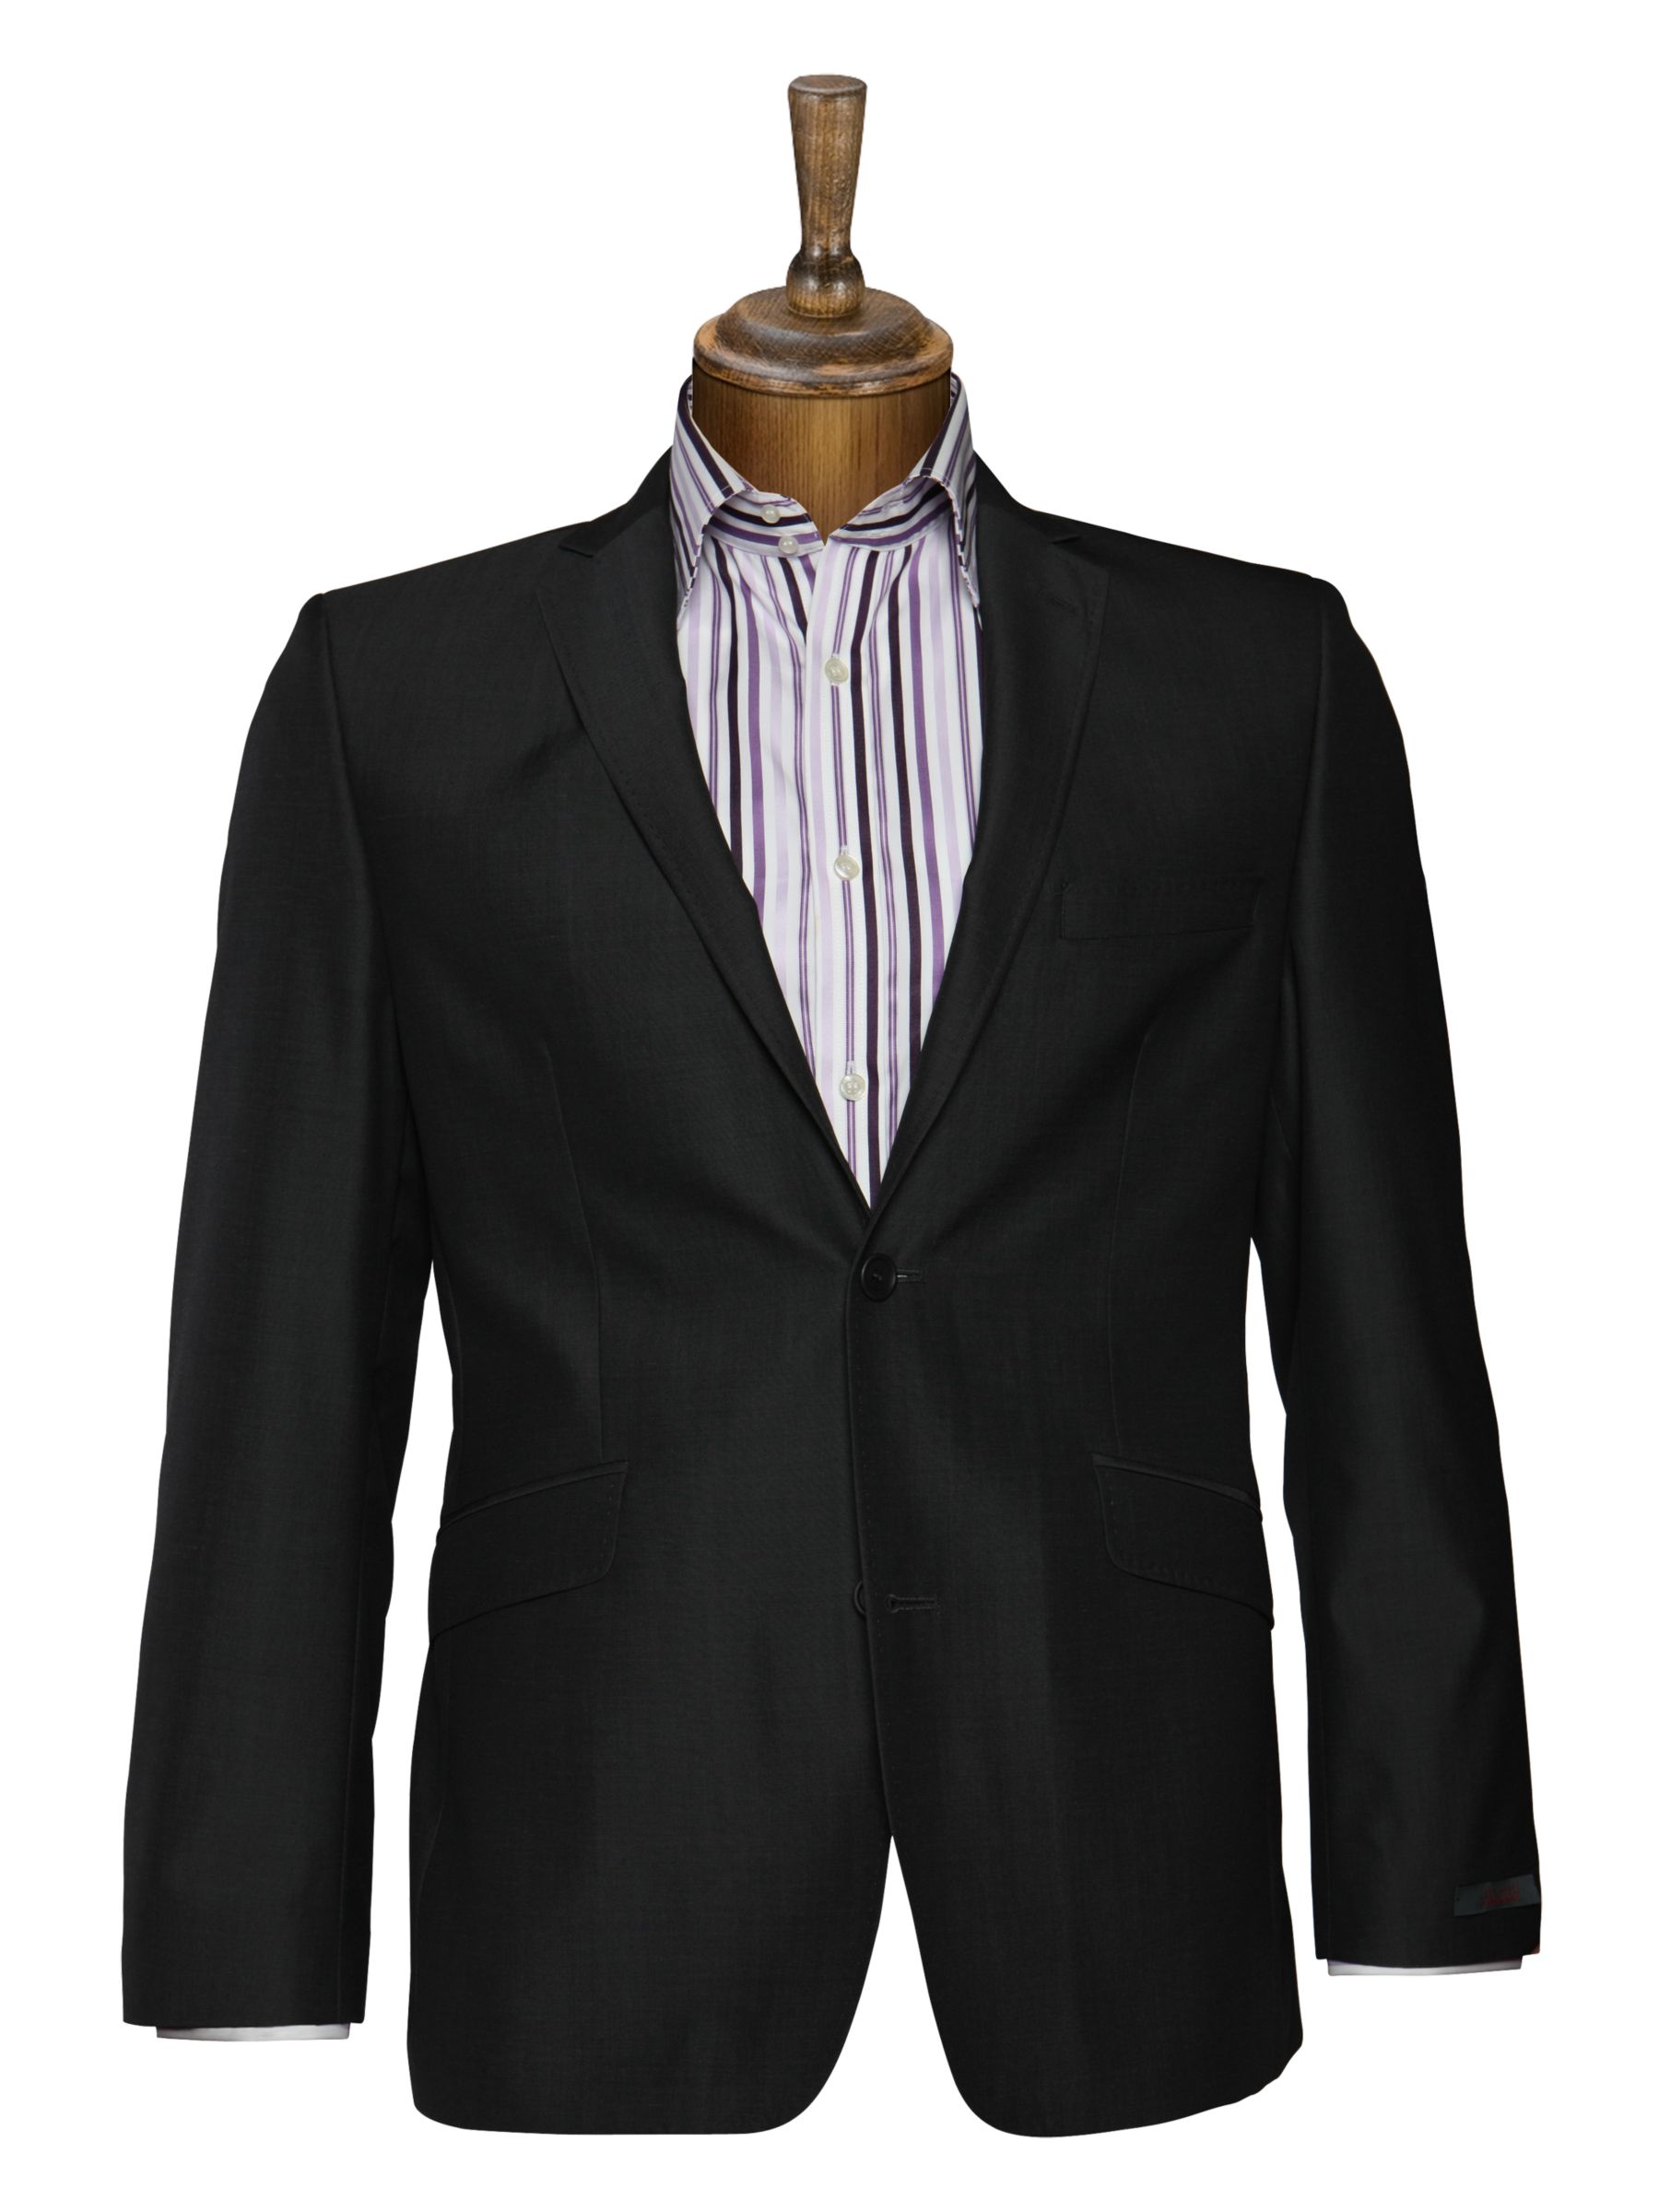 Ted Baker Timeless Classic Tonic Suit Jacket, Charcoal at John Lewis